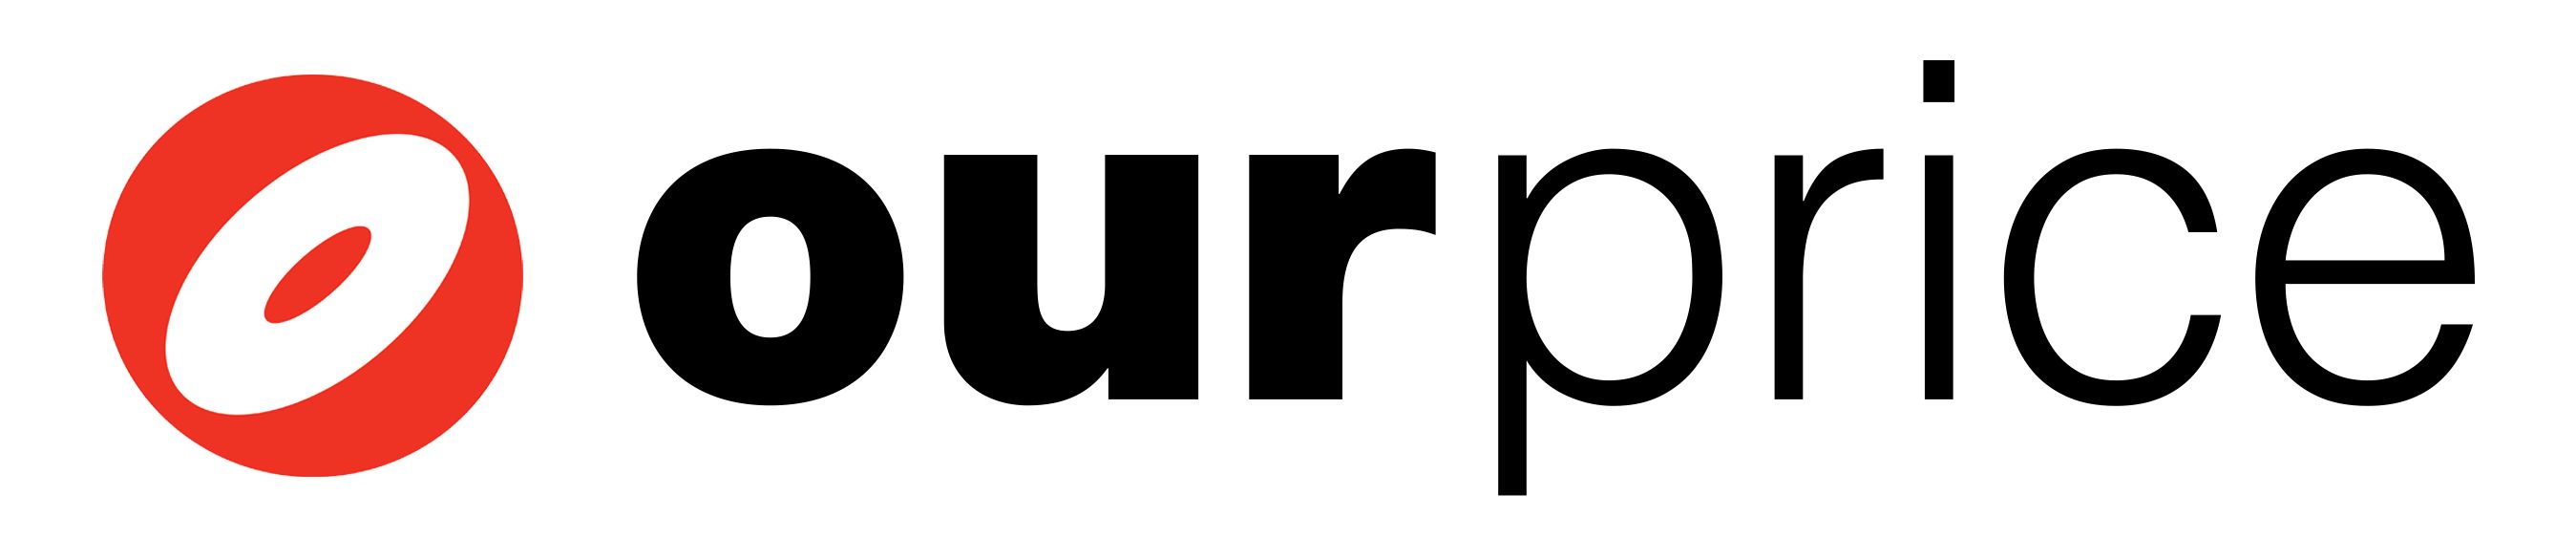 Ourprice.com Retail Limited Logo